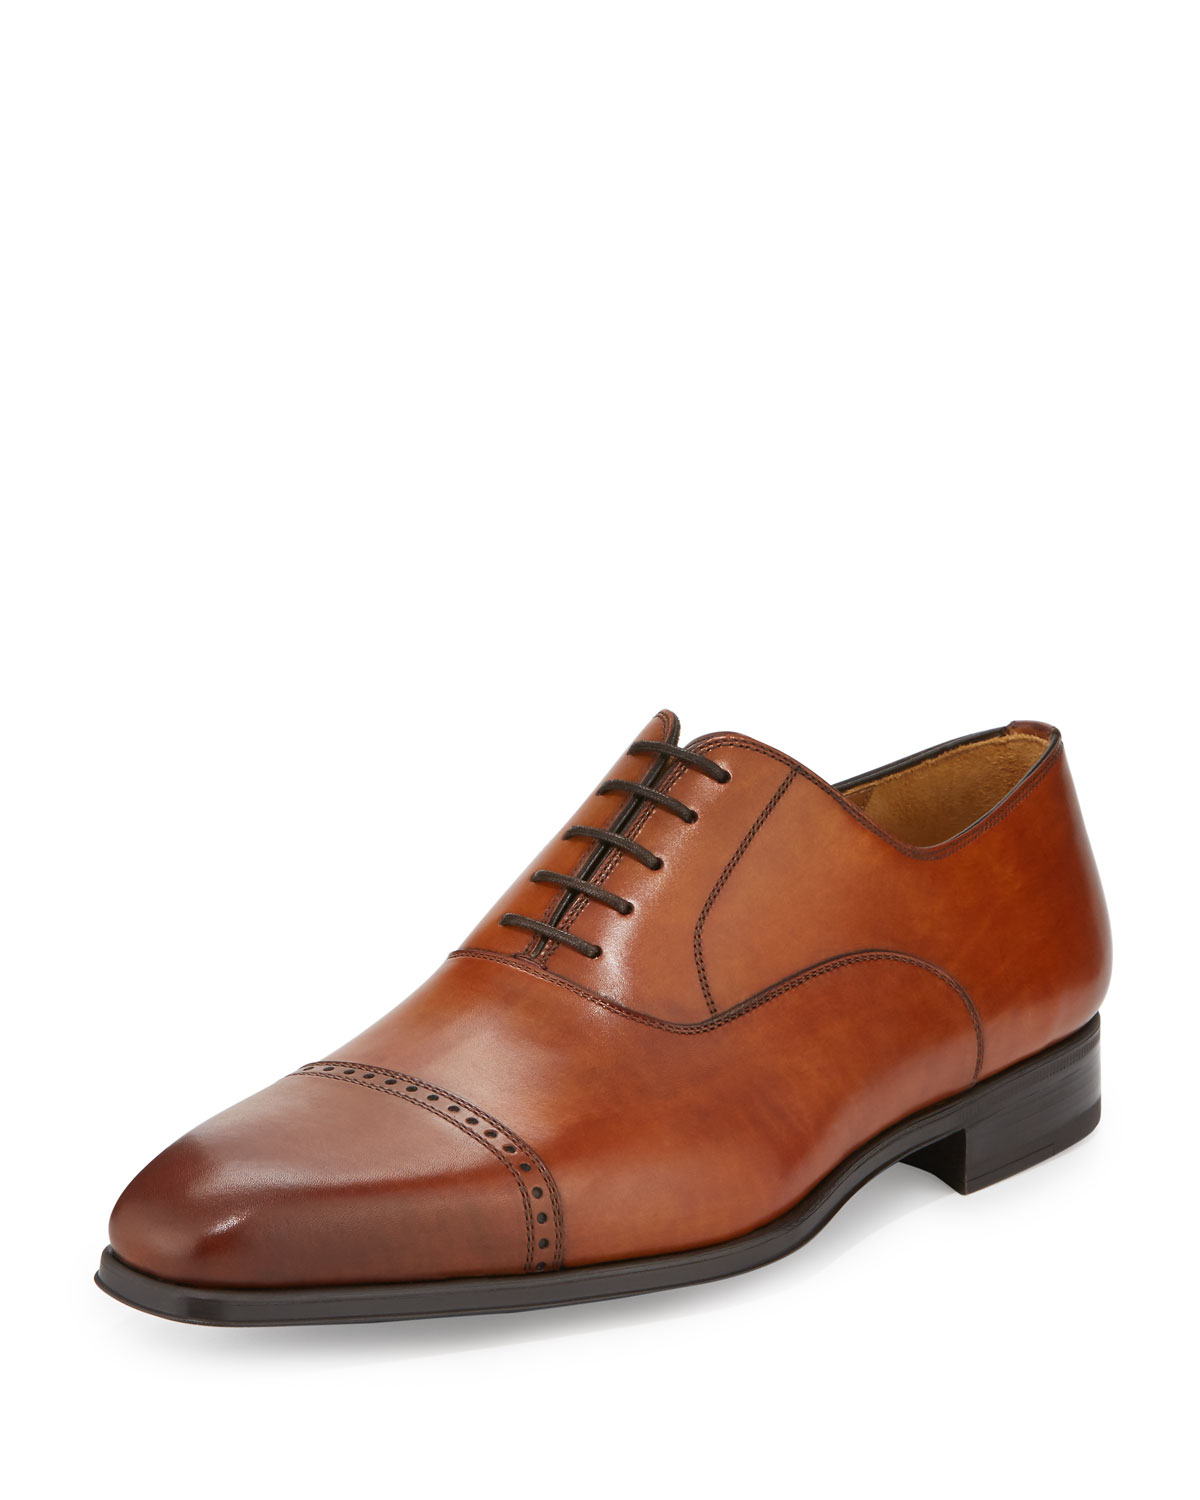 Neiman Marcus Leather Wolden Perforated Lace-up Dress Shoe in Cognac (Brown) for Men - Lyst